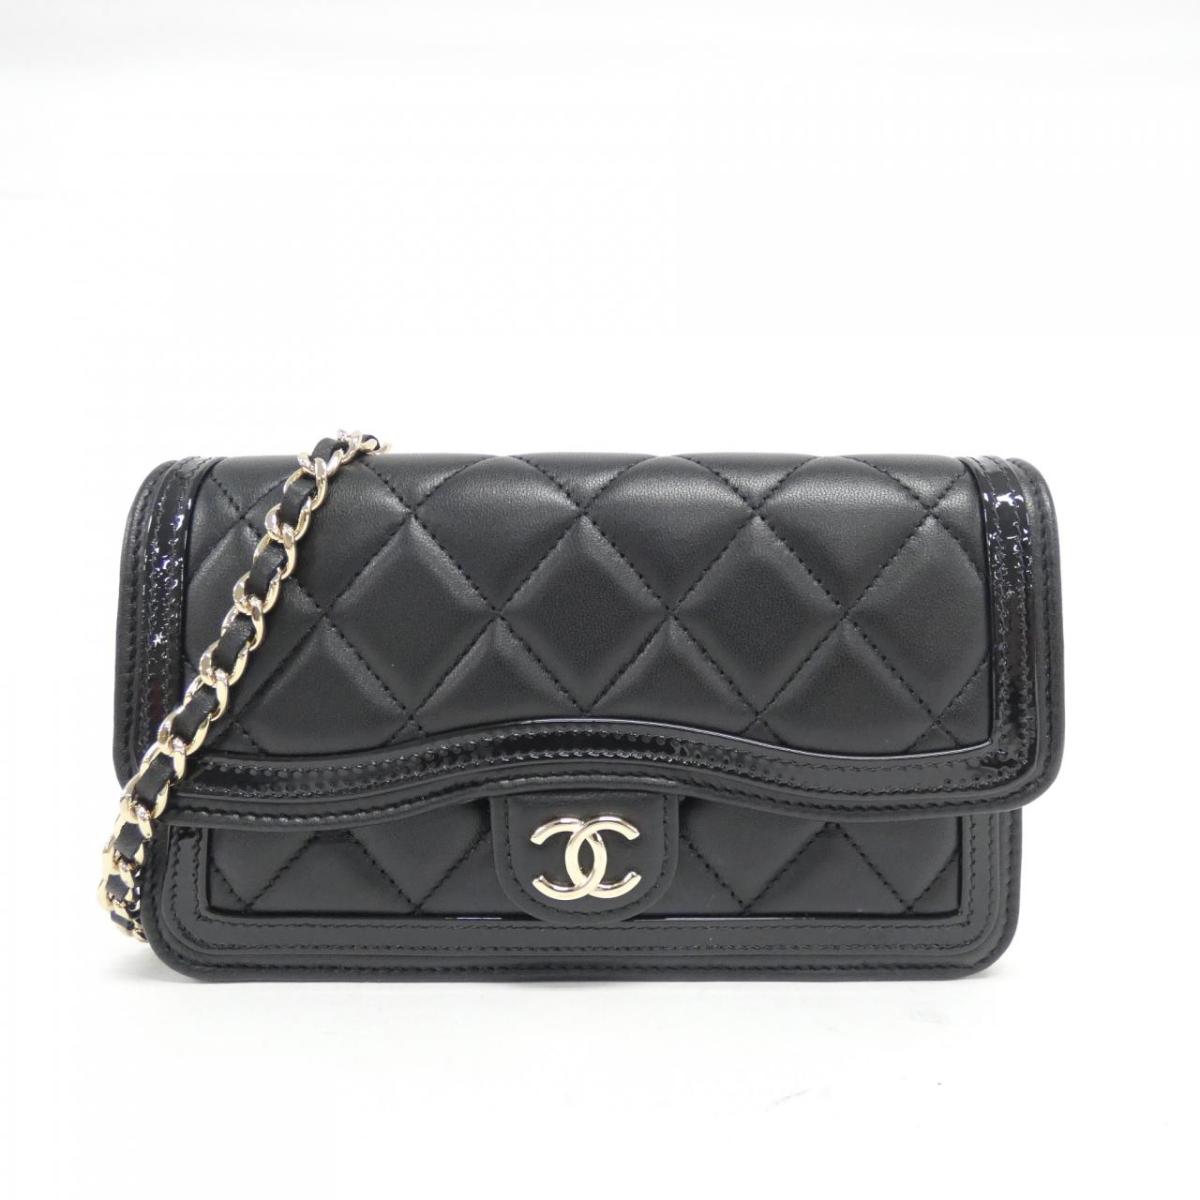 Chanel AP3559 Coin Pouch